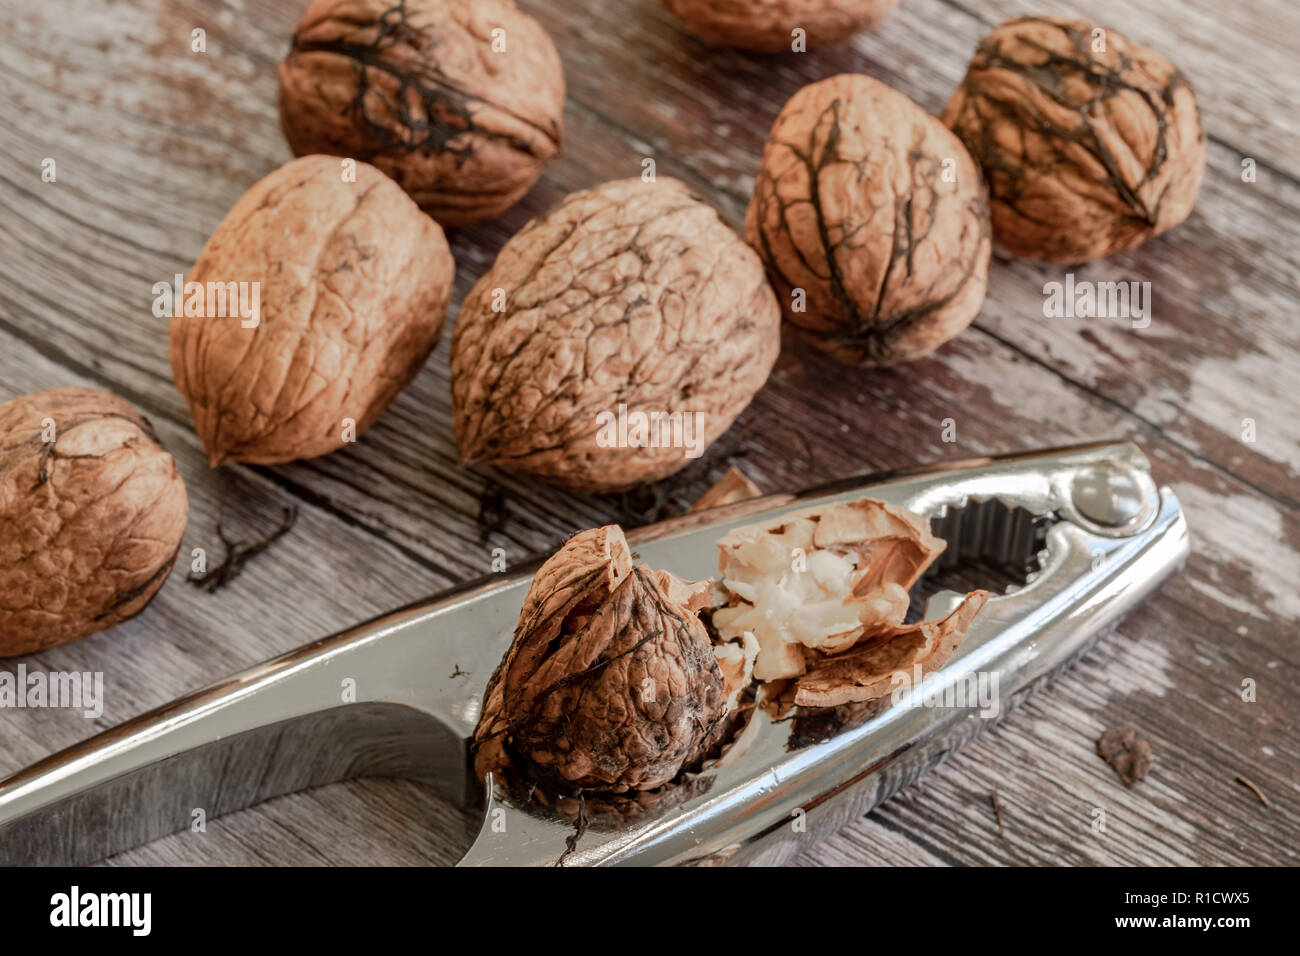 Close-up, shallow focus image of freshly cracked Walnuts seen with a metal Nutcracker. Fragments of the shells are seen on the wooden table. Stock Photo